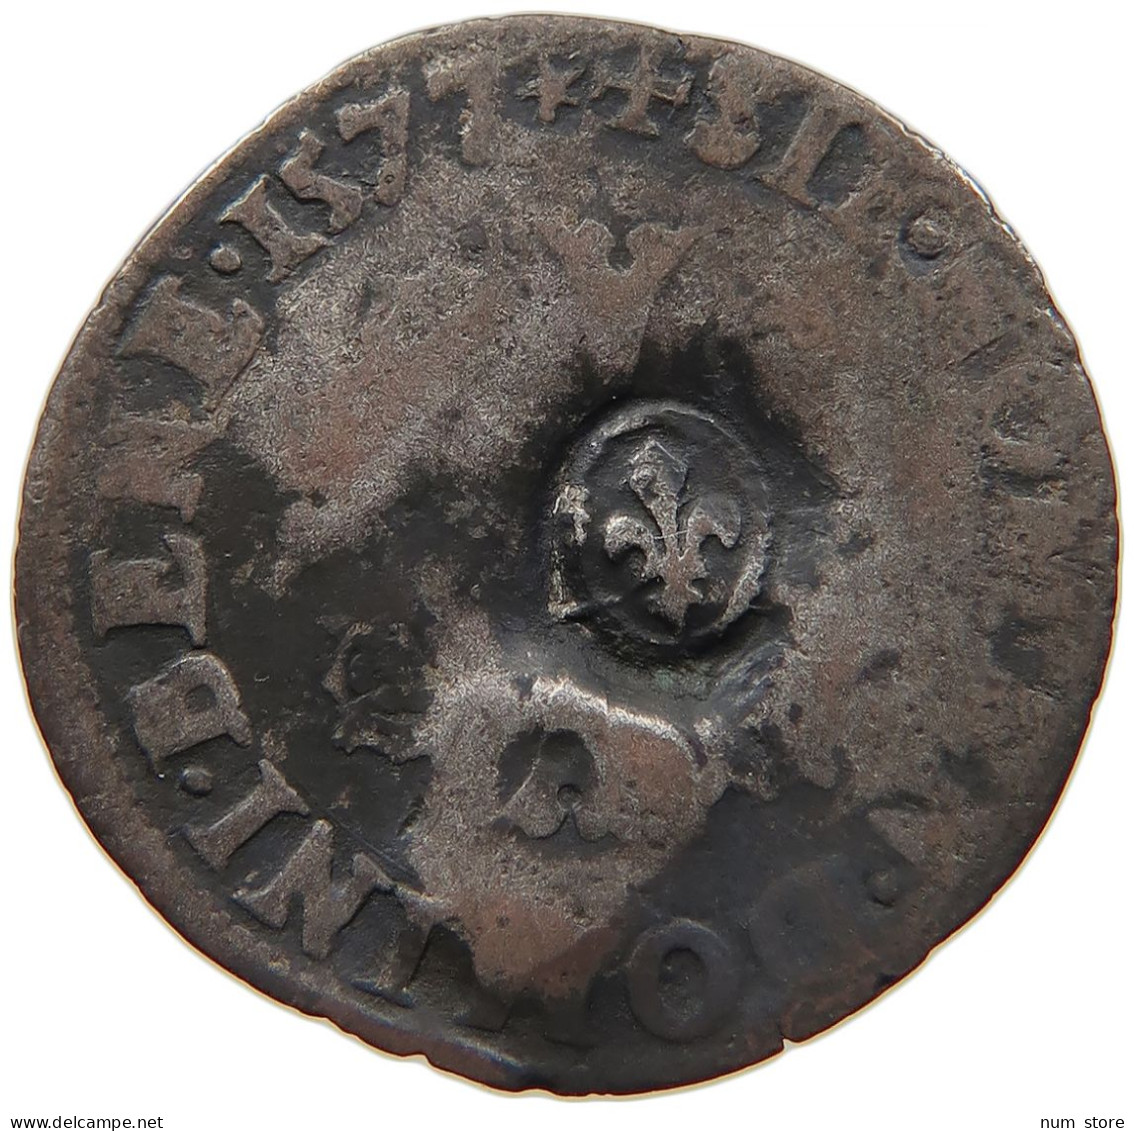 FRANCE Henri III. (1574-1589) COUNTERMARKED LILLY #t032 0789 - 1574-1589 Henry III